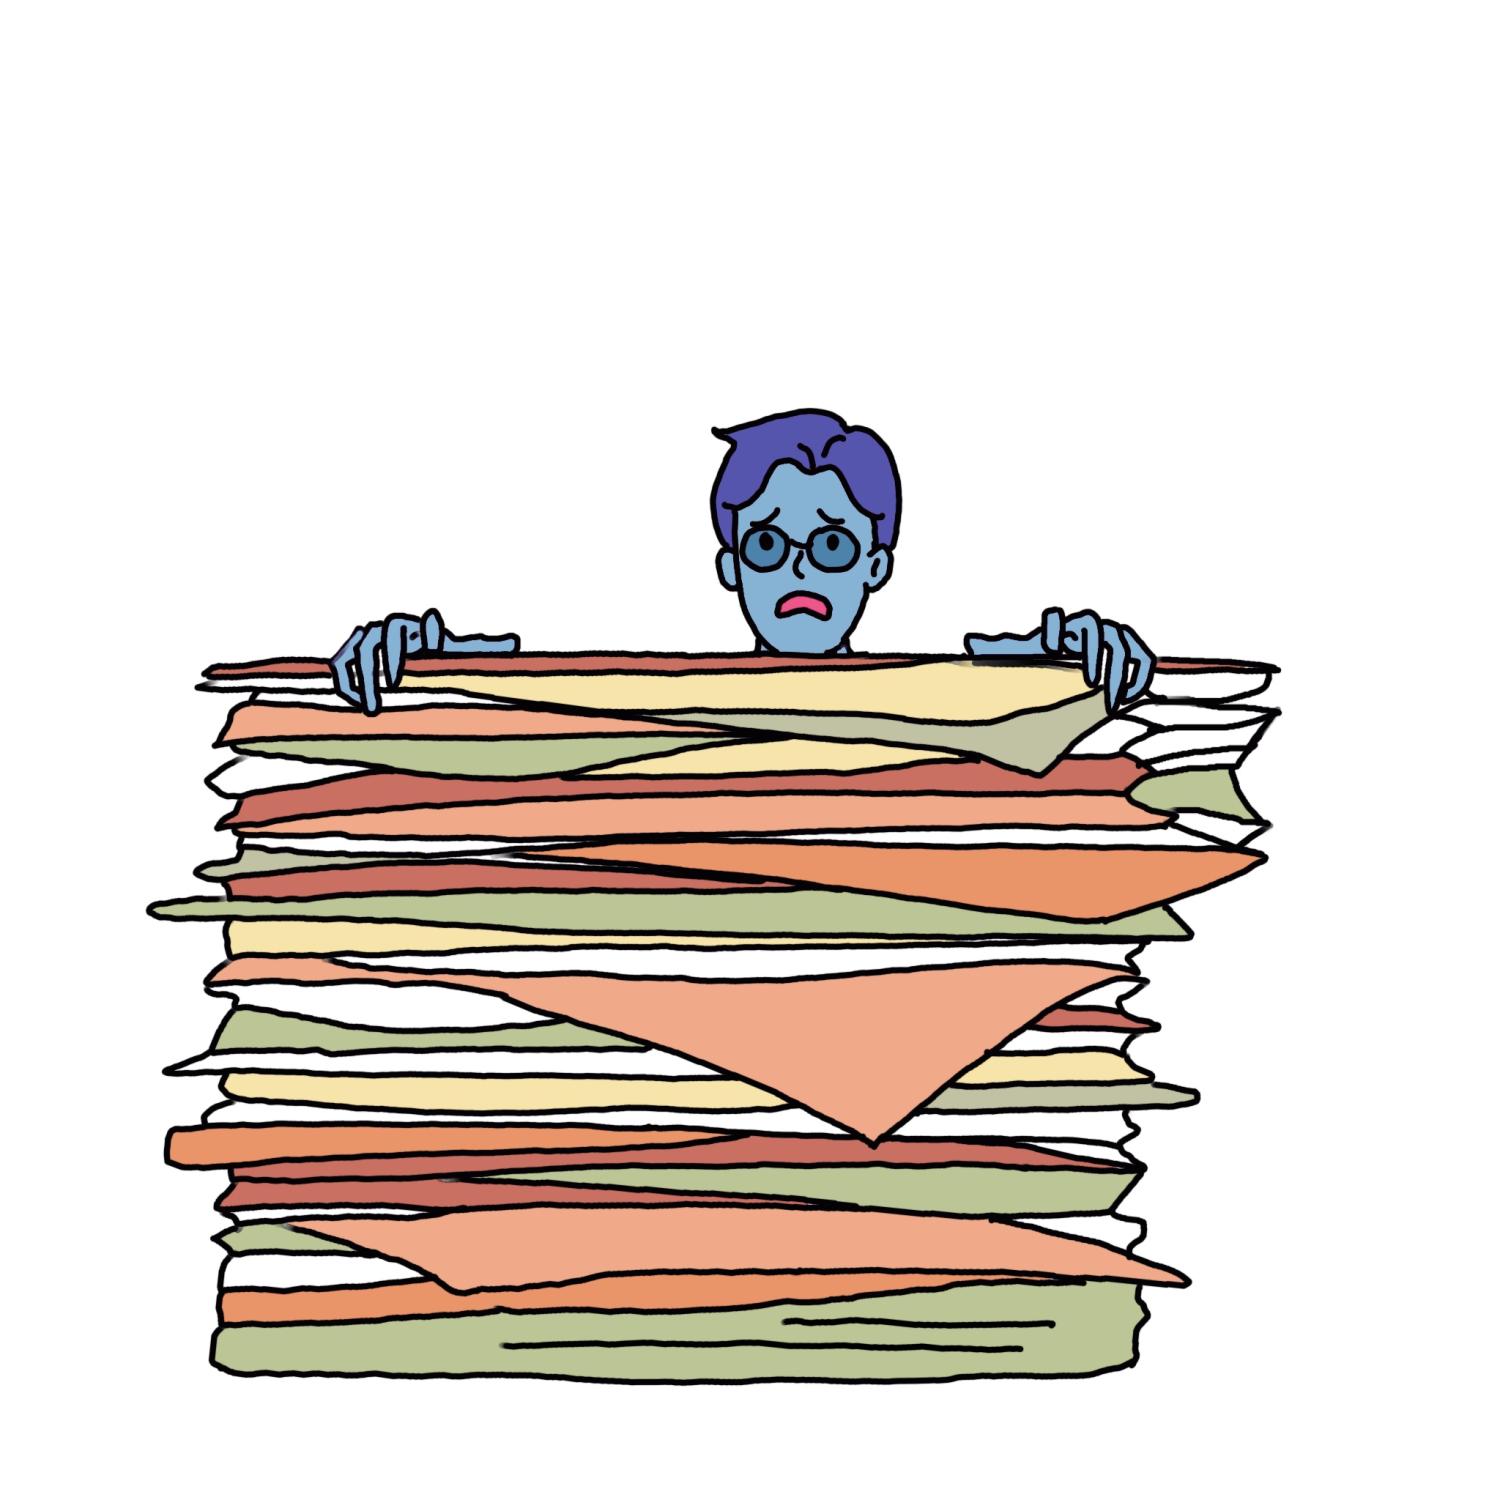 A student stares down at a massive stack of syllabi.